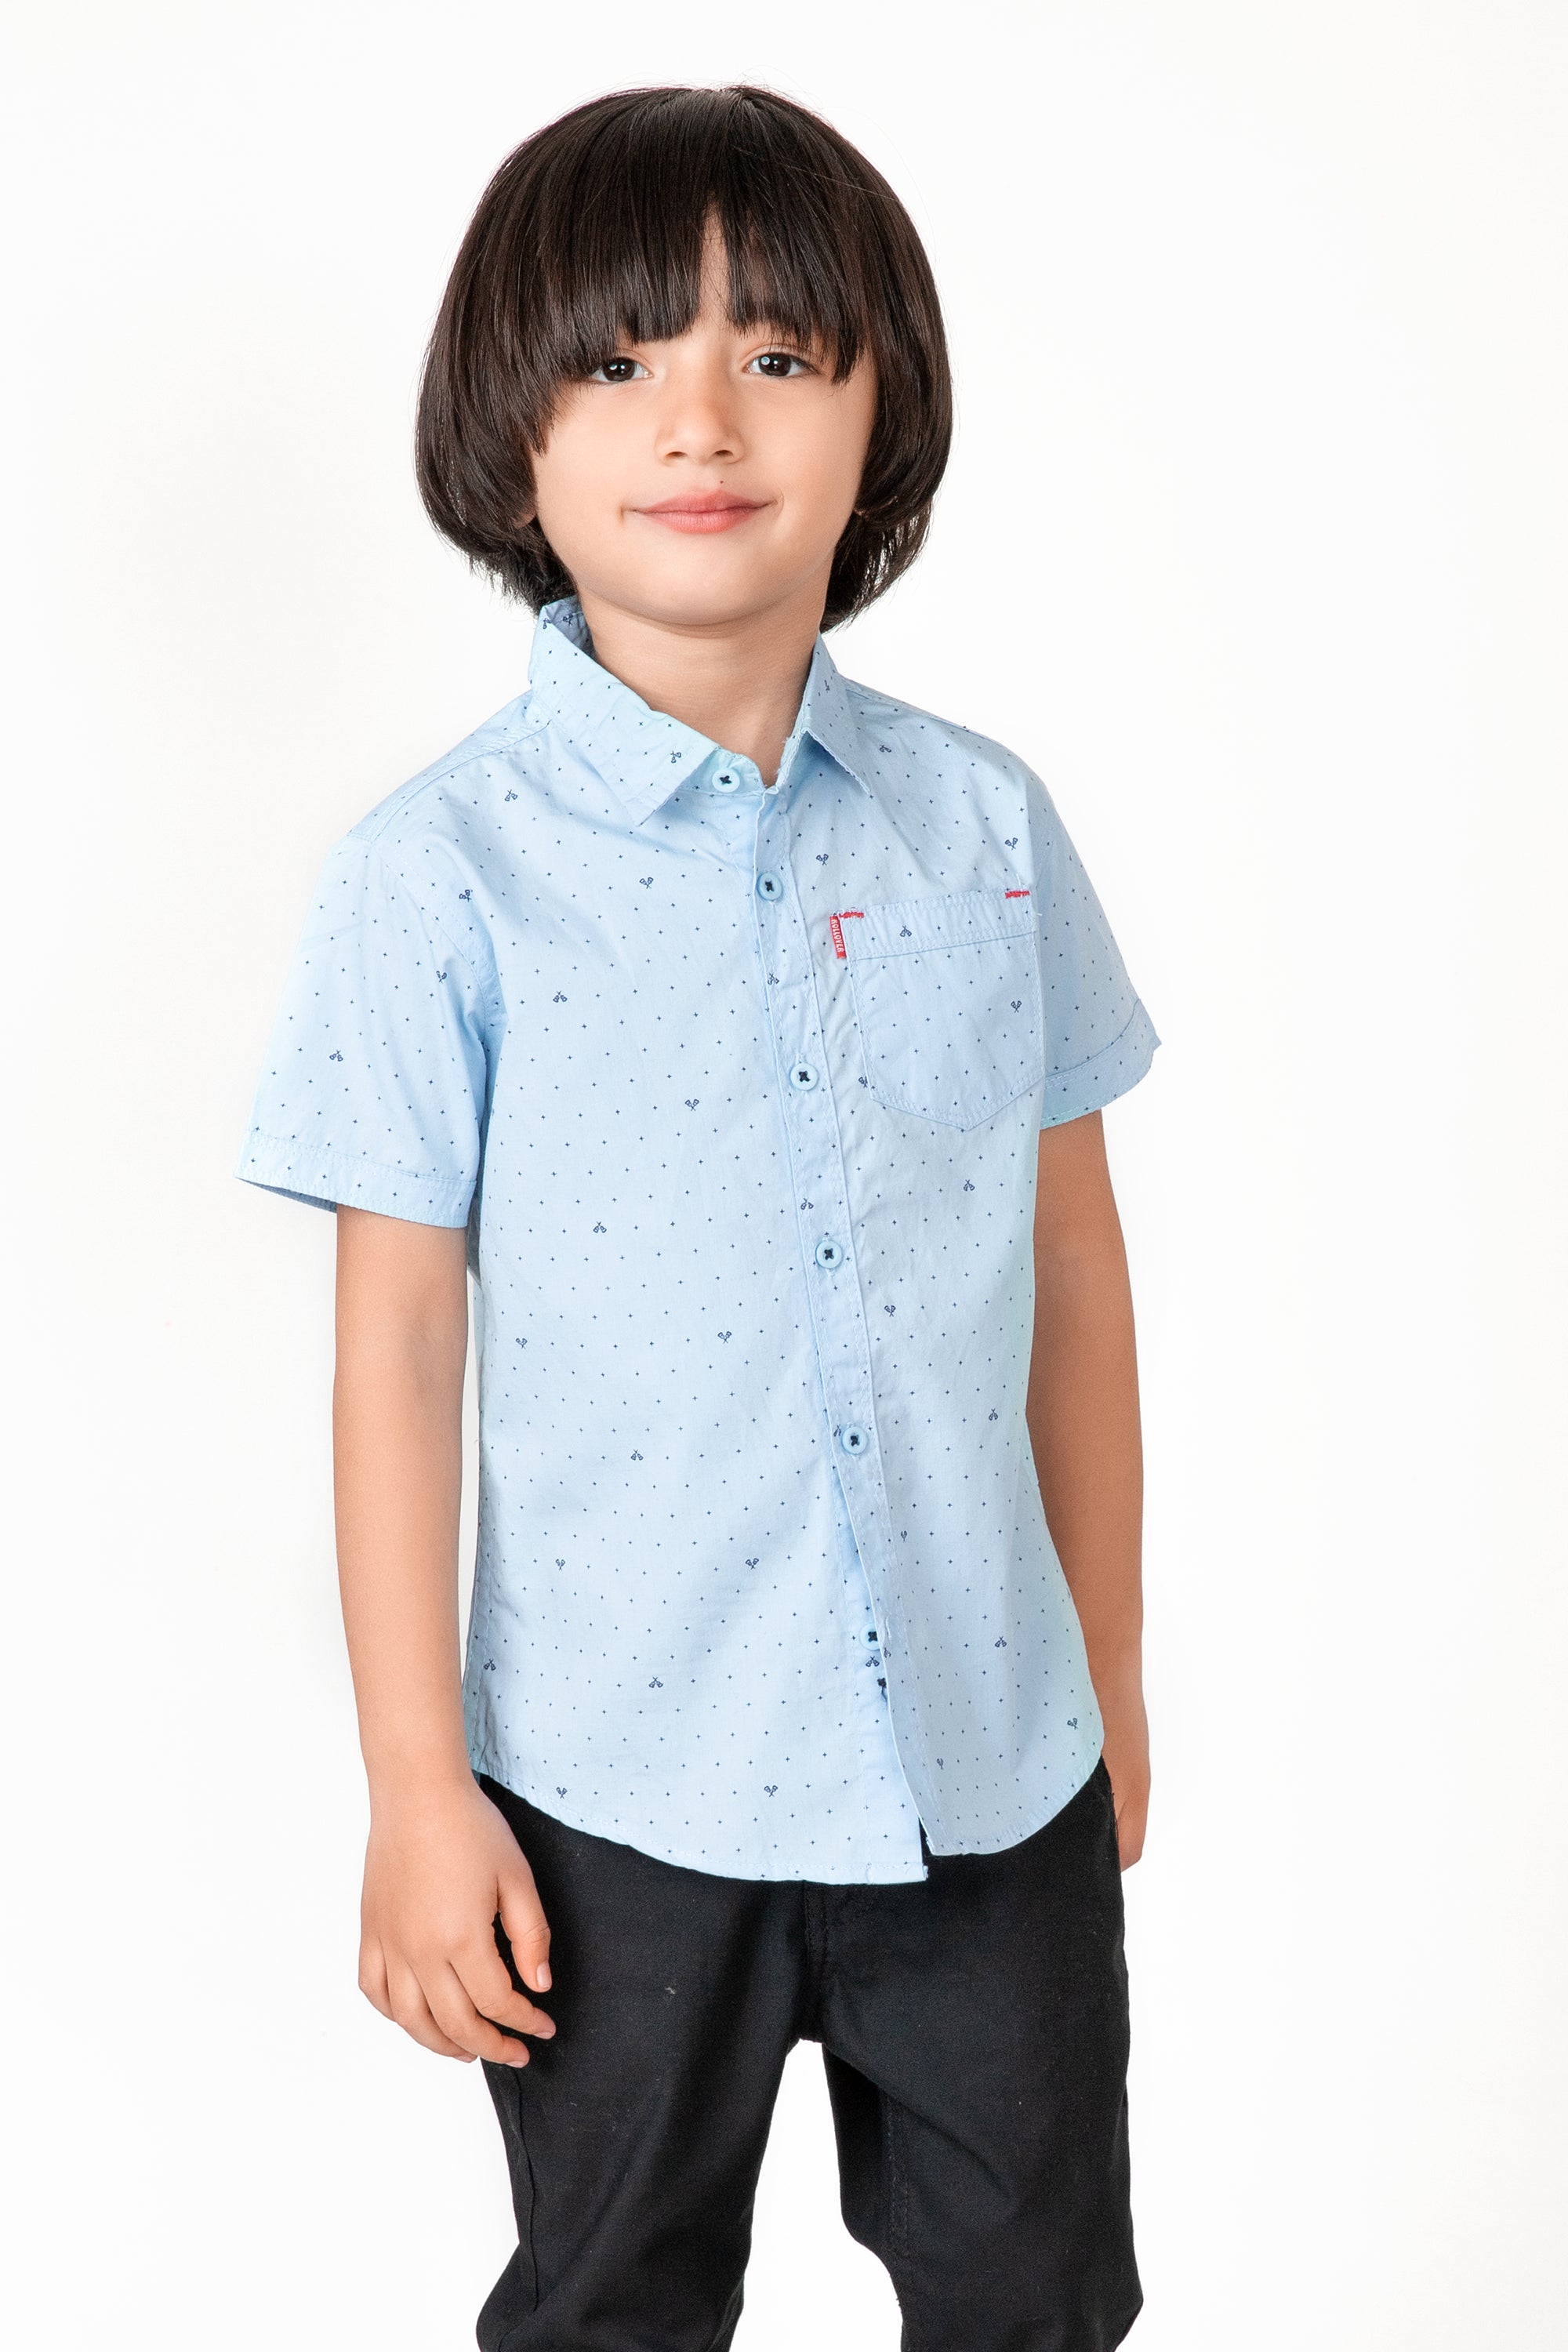 Rollover Slim Fit Printed Half Sleeves for Boys